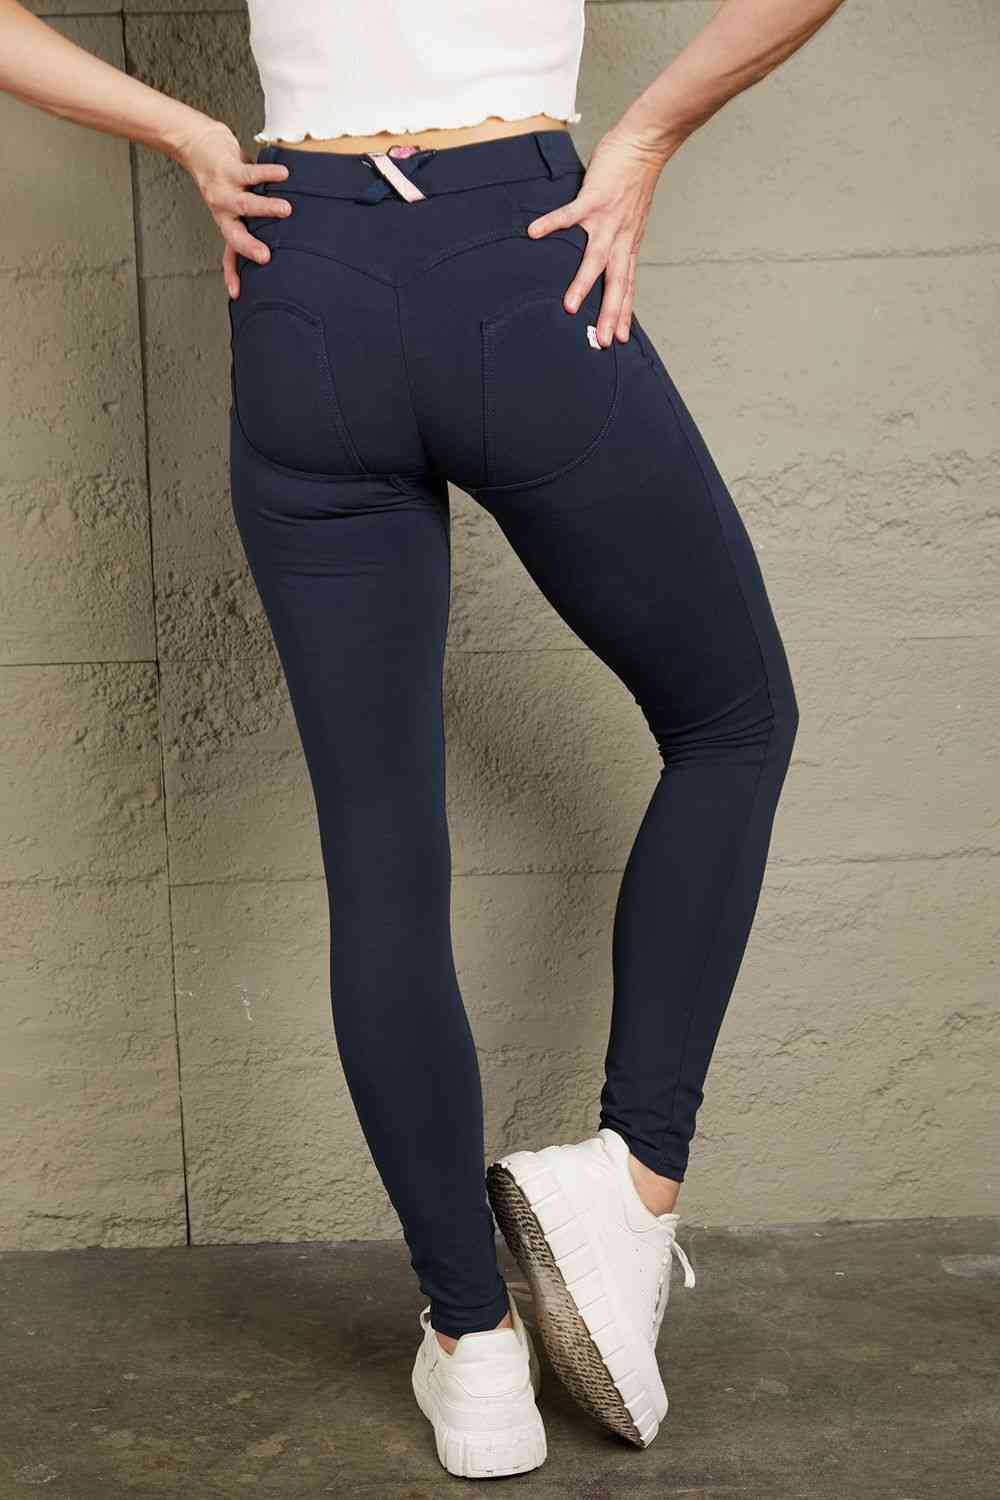 Dim Gray Baeful Buttoned Skinny Long Jeans Sentient Beauty Fashions Apparel &amp; Accessories